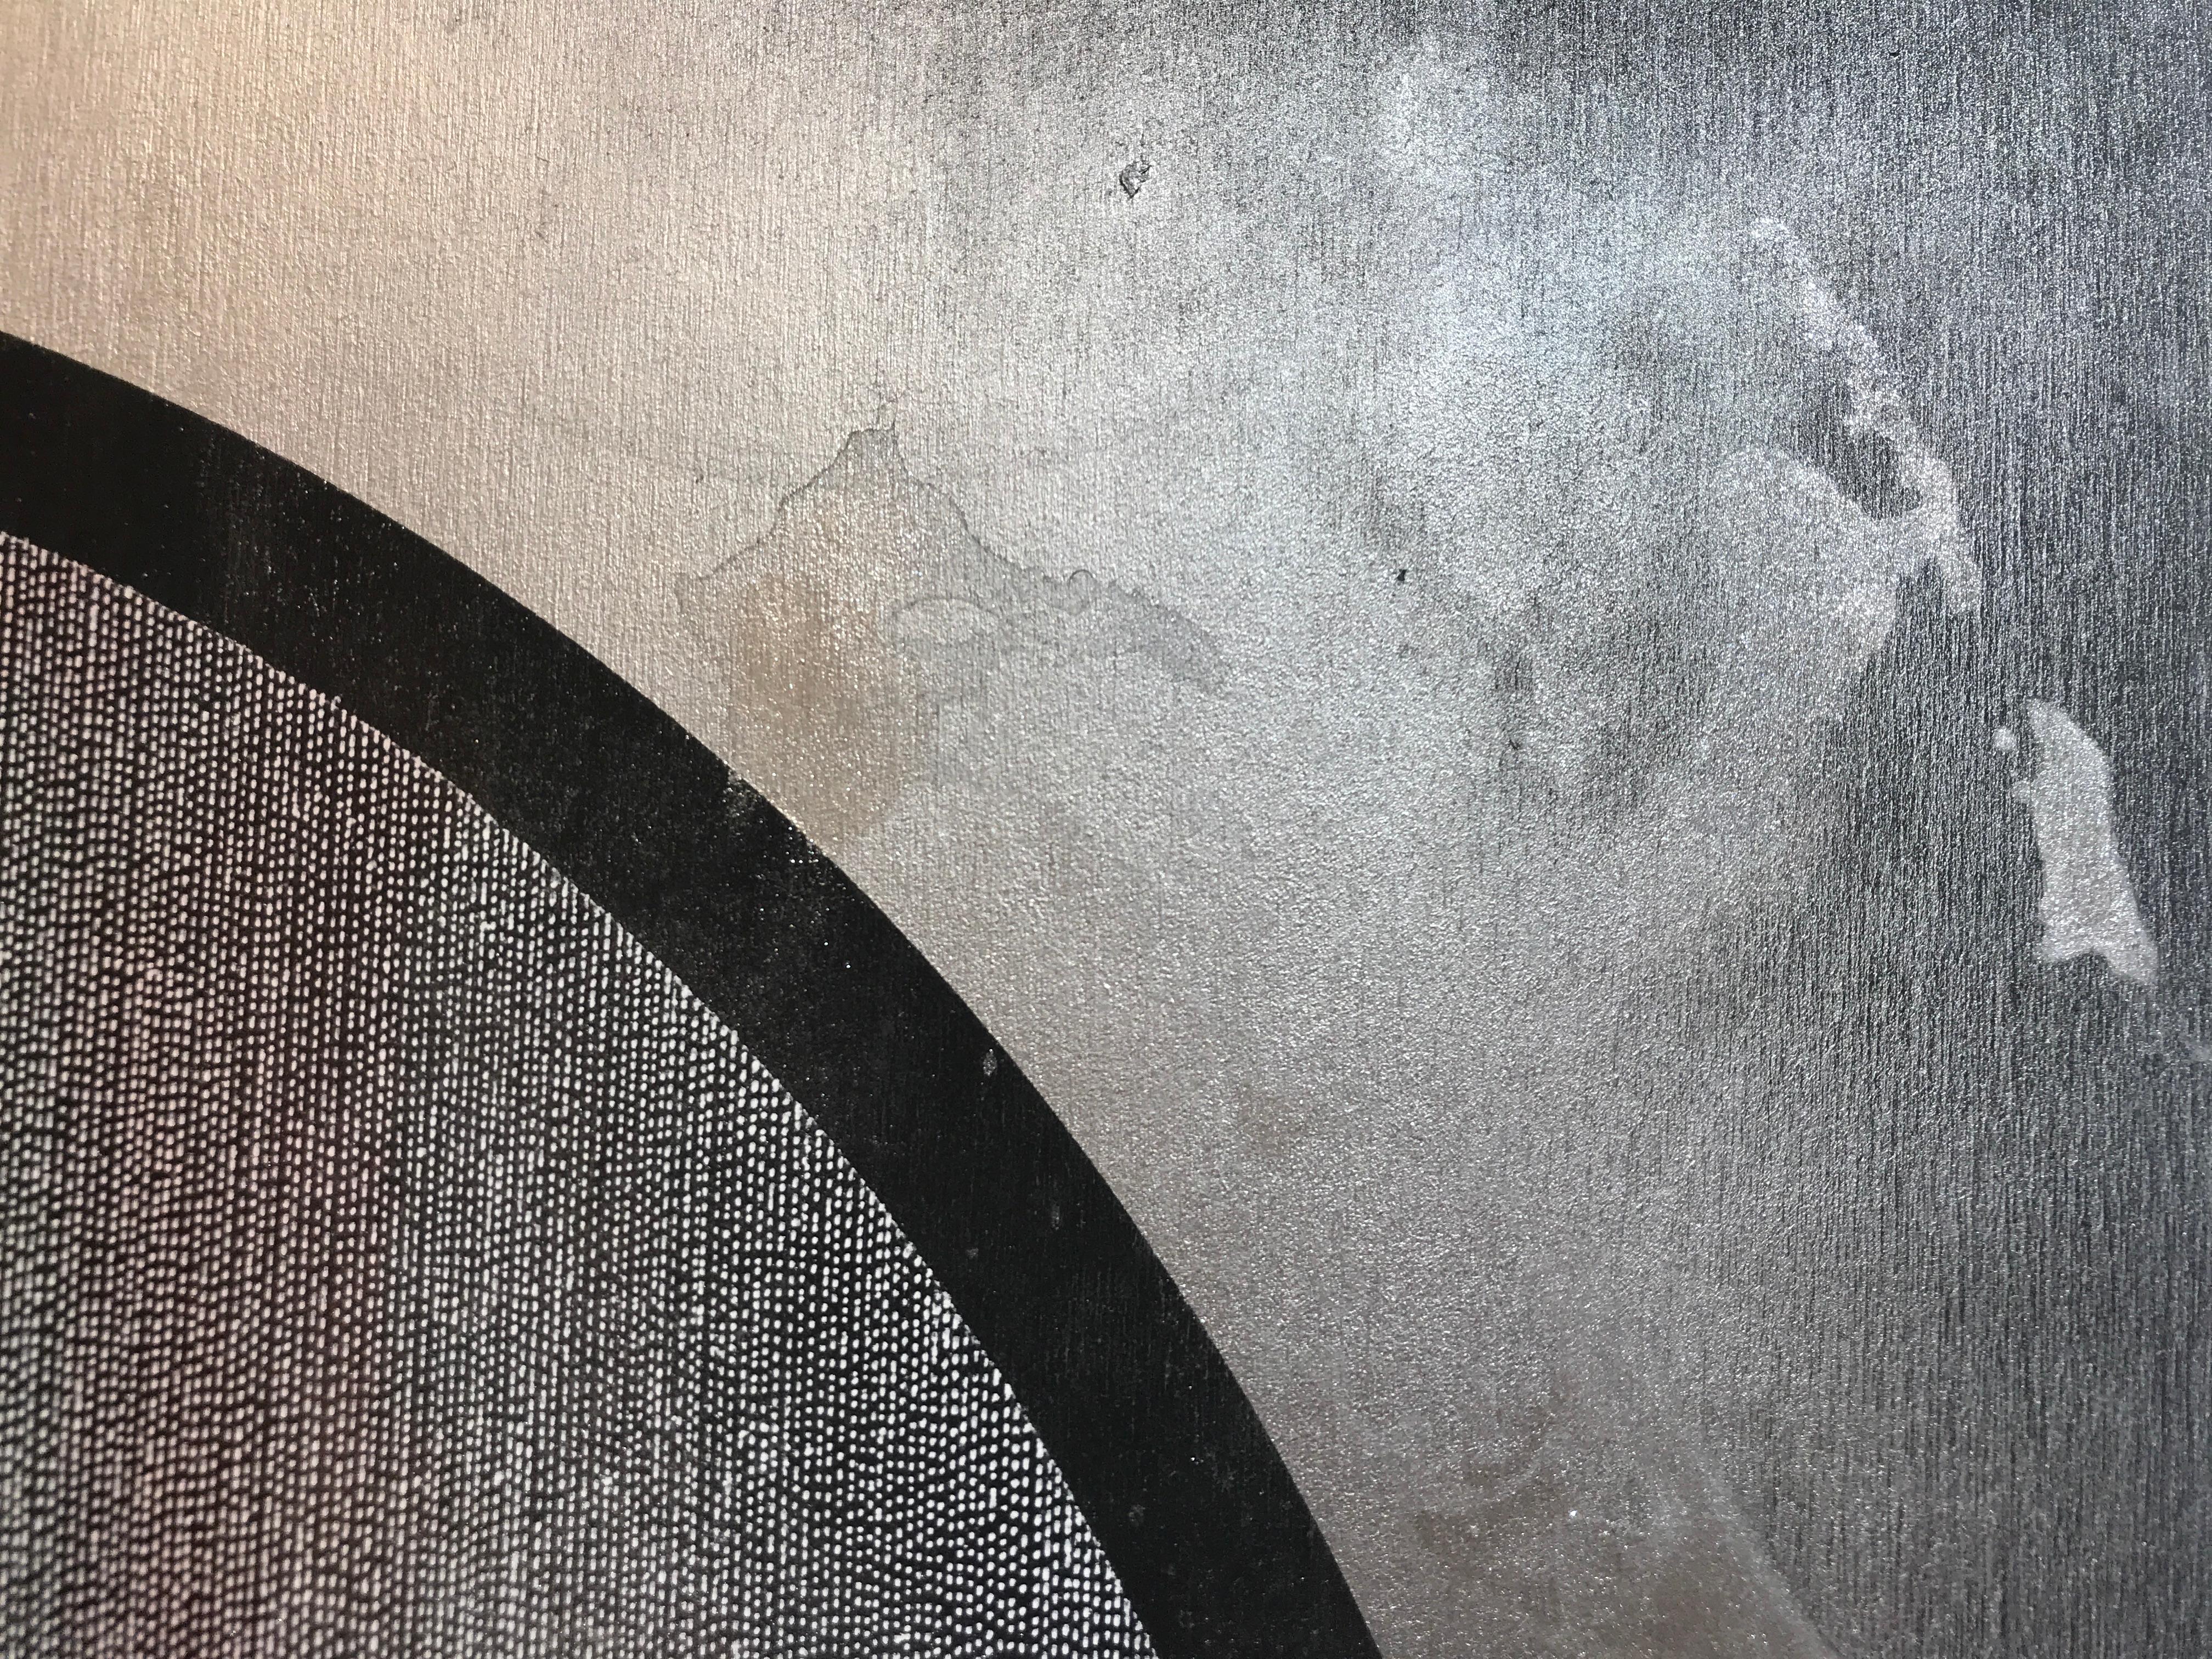 Ink, powder pigment and spray paint on panel 

The artist in her own words: 

I’ve been fascinated with detailed monochromatic works since the first time I saw the beautiful landscape drawings of my grandfather, a successful industrial designer. 